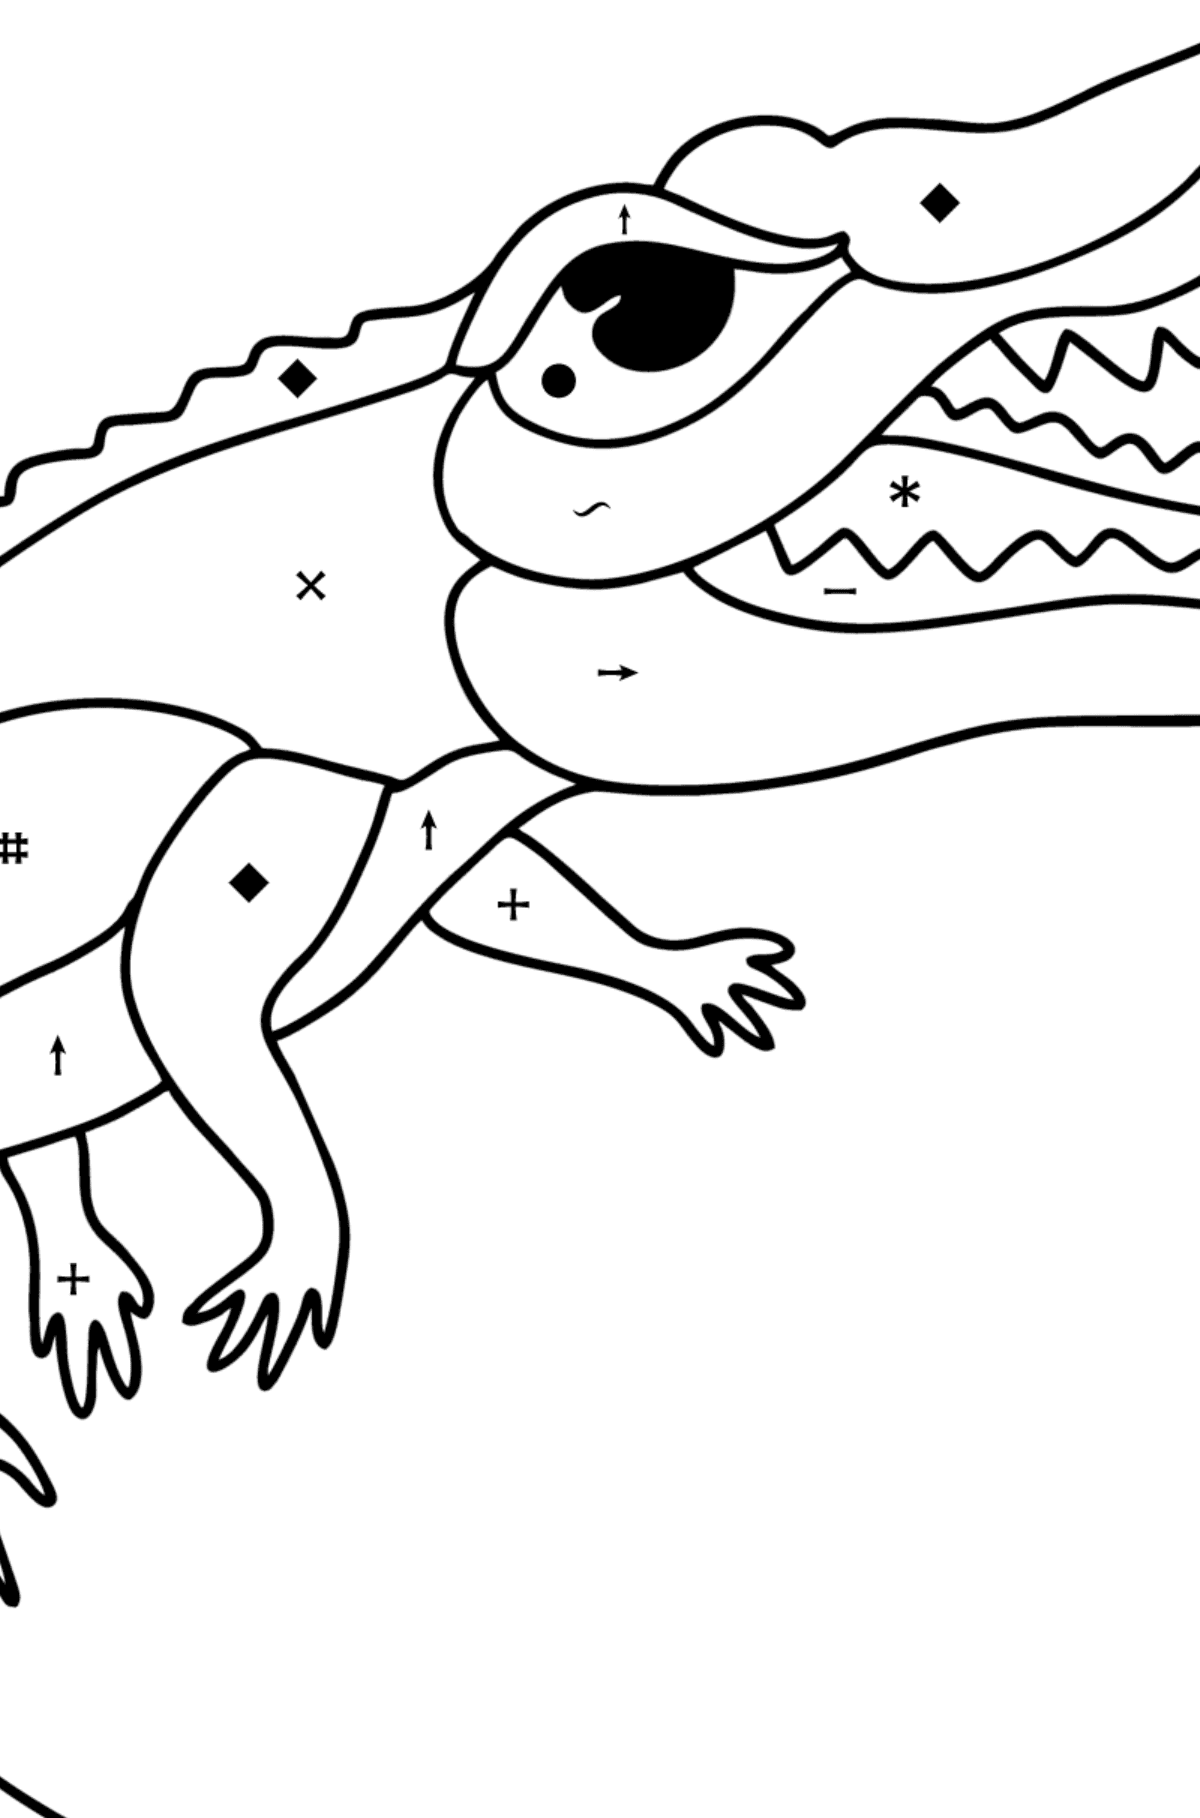 Saltwater Crocodile сoloring page - Coloring by Symbols for Kids